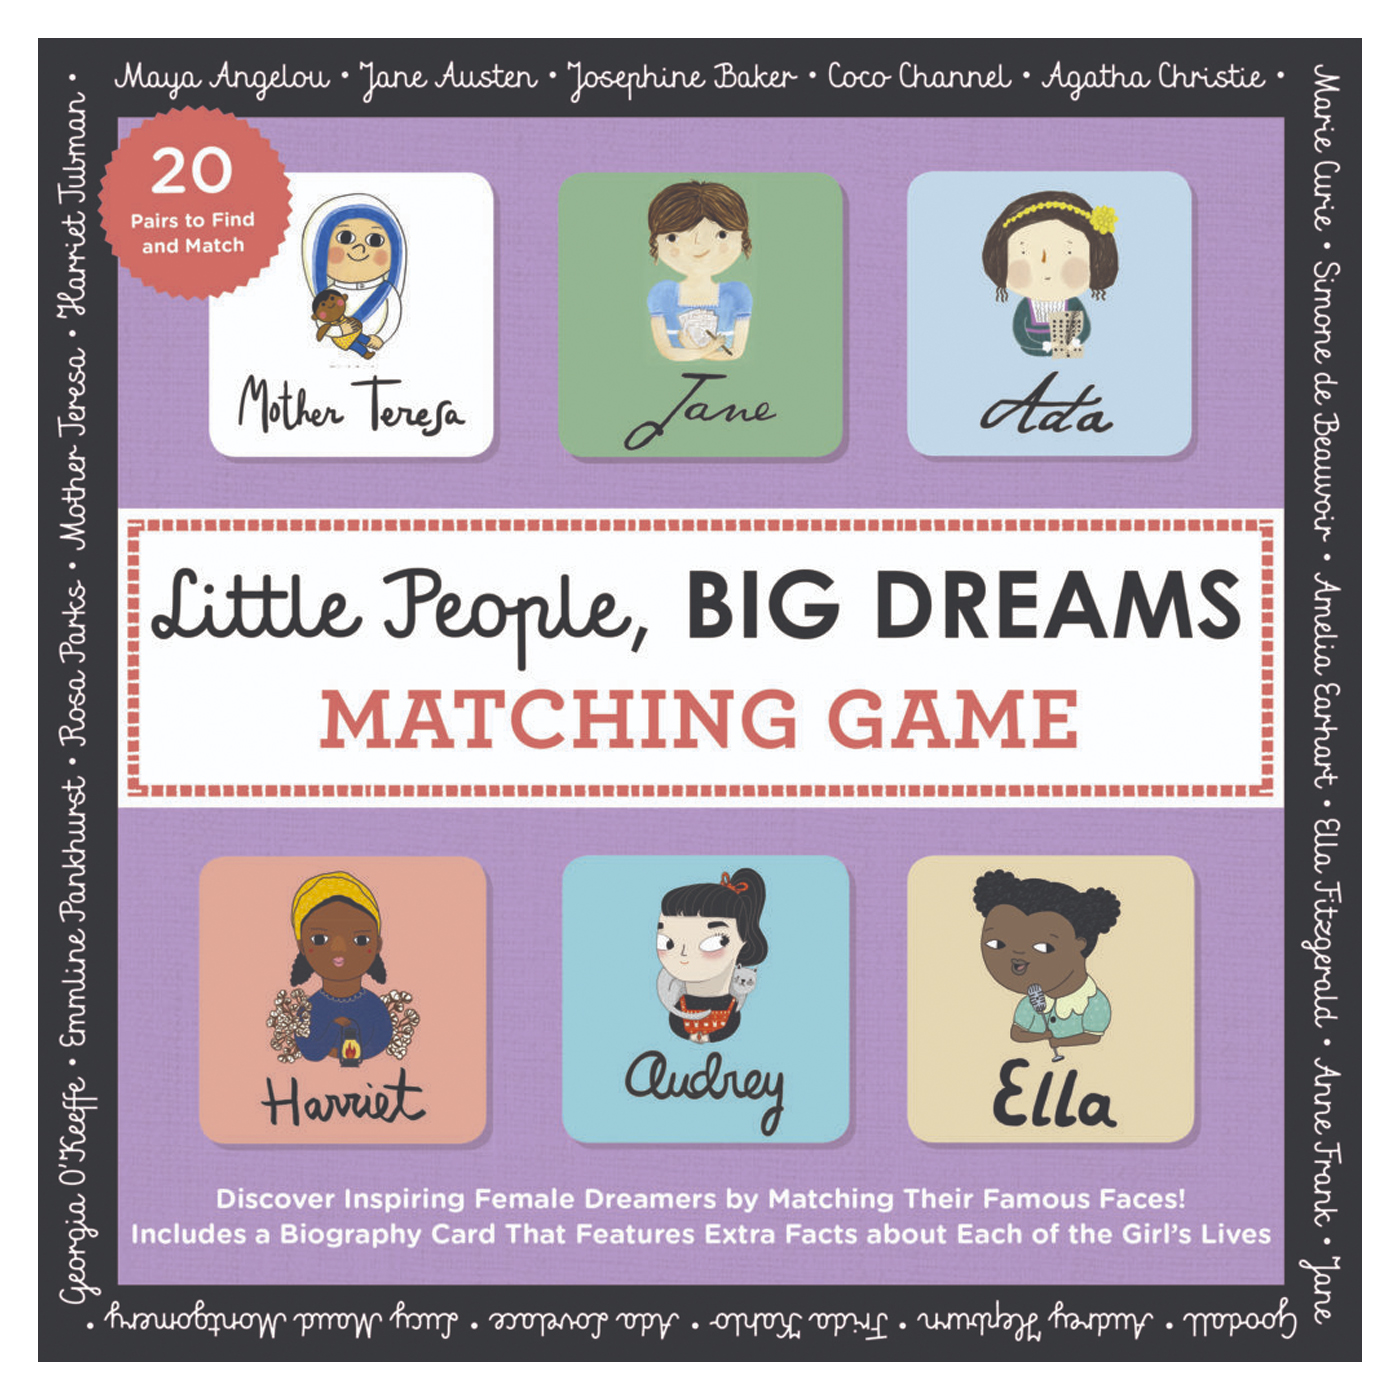  Little People Big Dreams: Matching Game